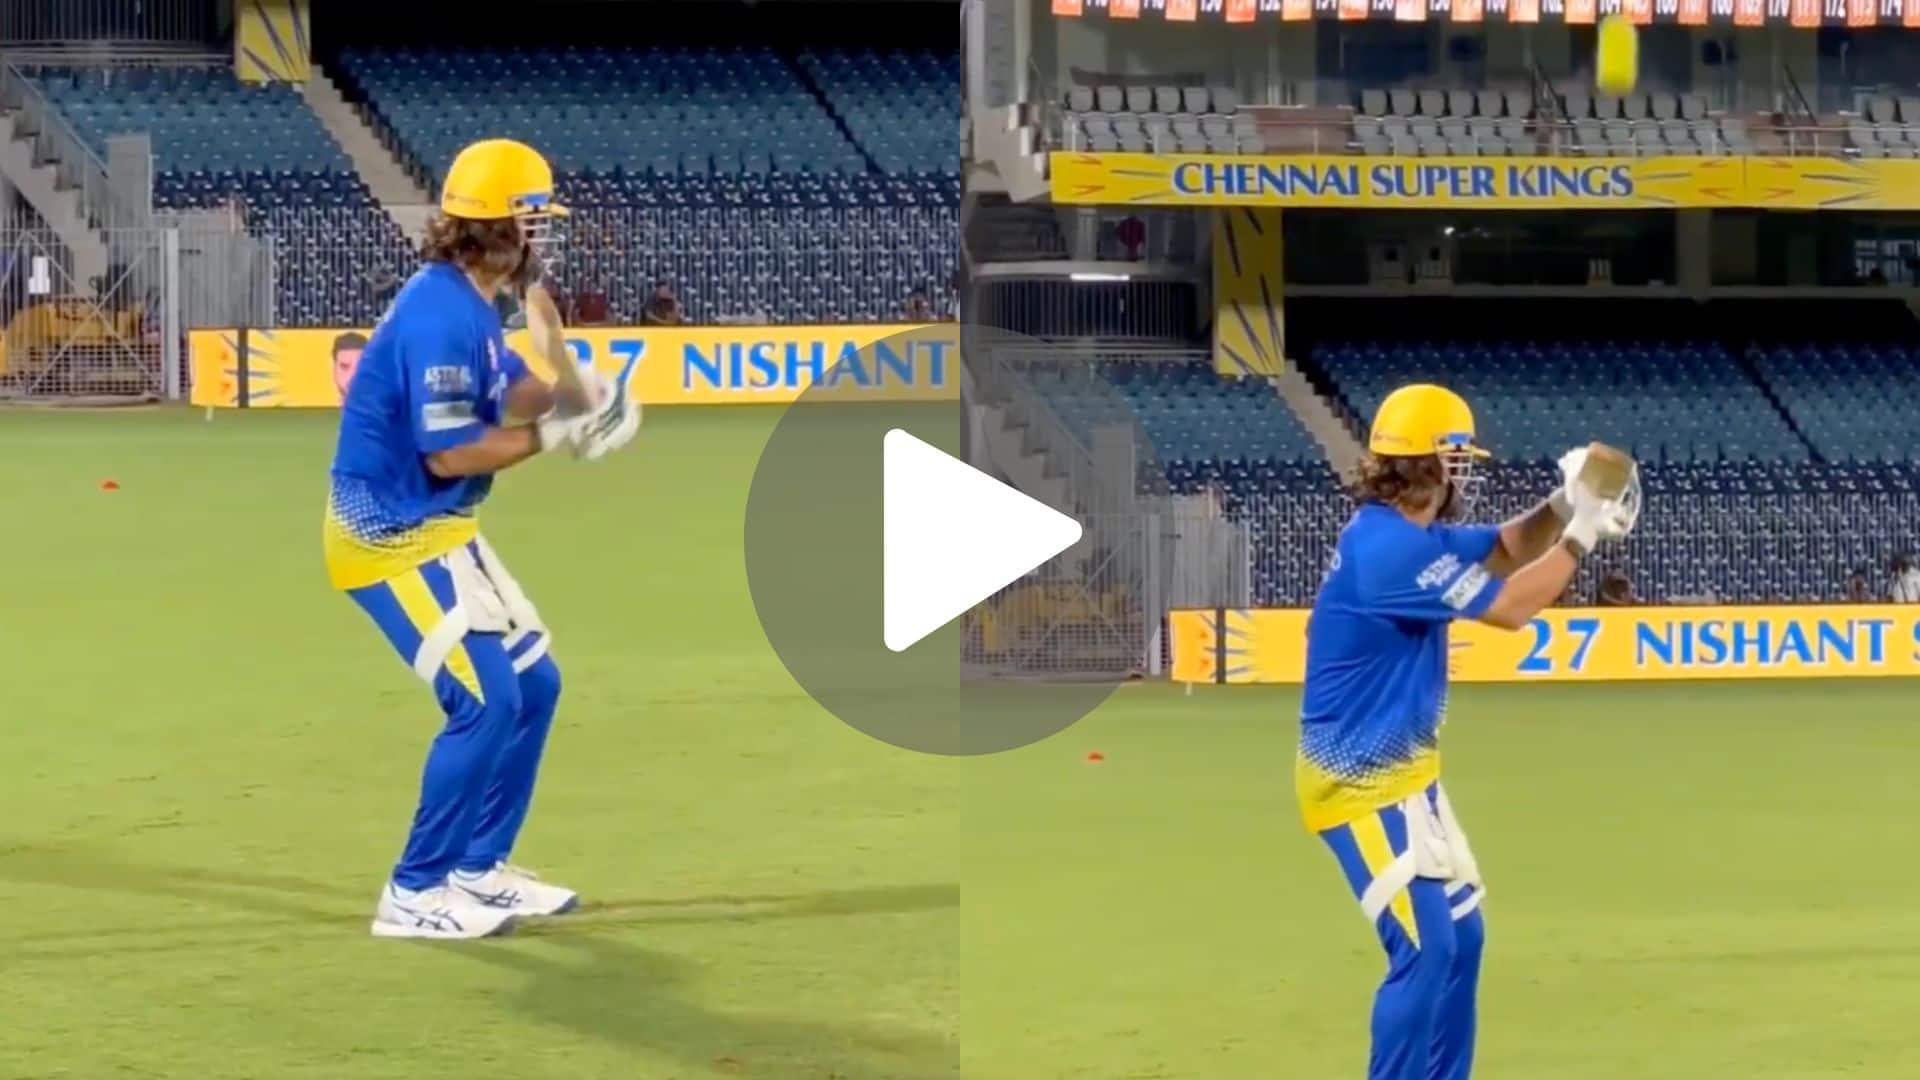 [Watch] MS Dhoni Nails No-Look Uppercut In Practice Session Ahead Of CSK vs LSG